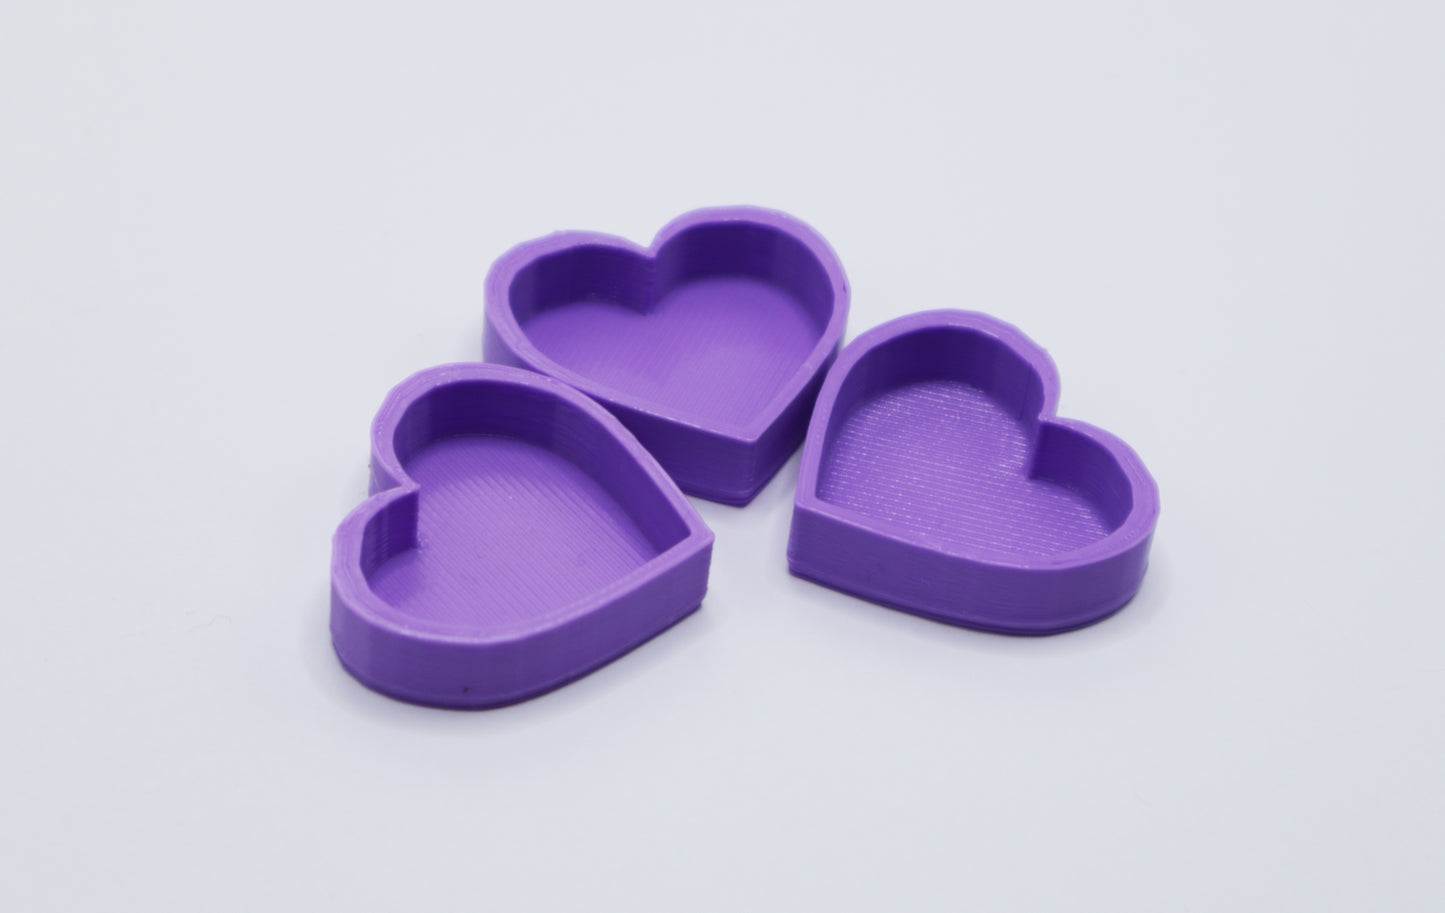 3X Heart-Shaped Calcium Dishes